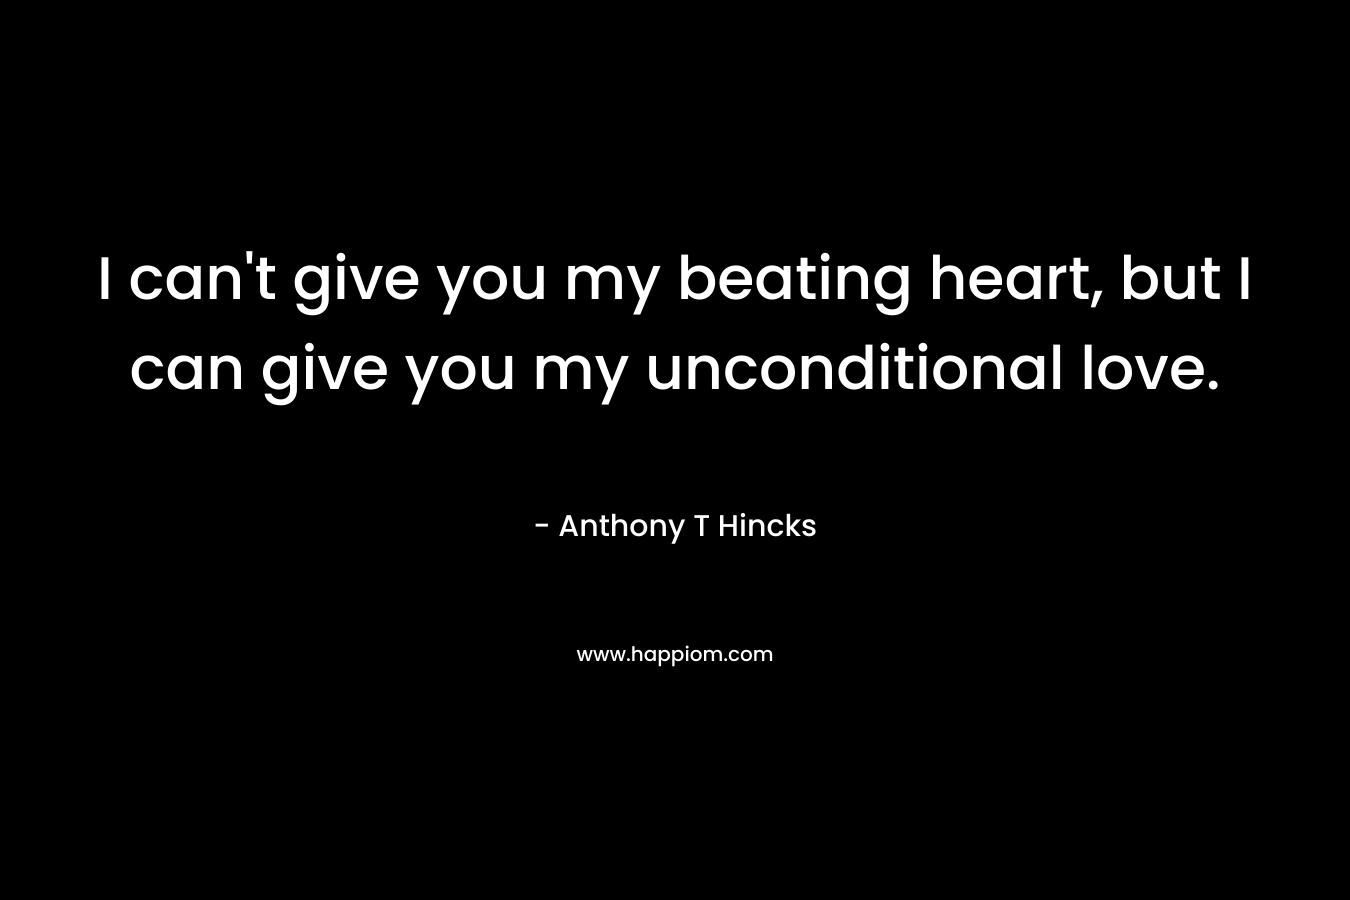 I can't give you my beating heart, but I can give you my unconditional love.